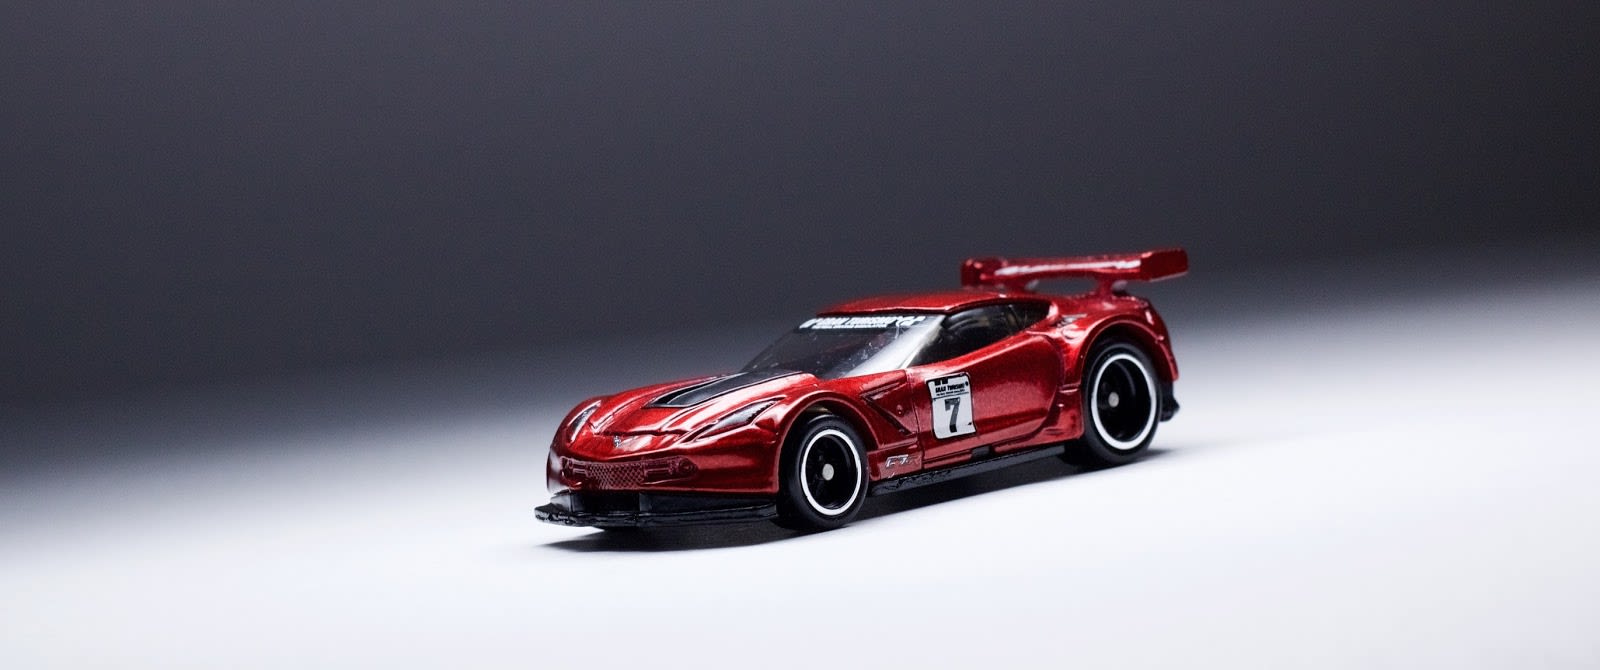 See the rest of HW’s Gran Turismo Entertainment Series here.